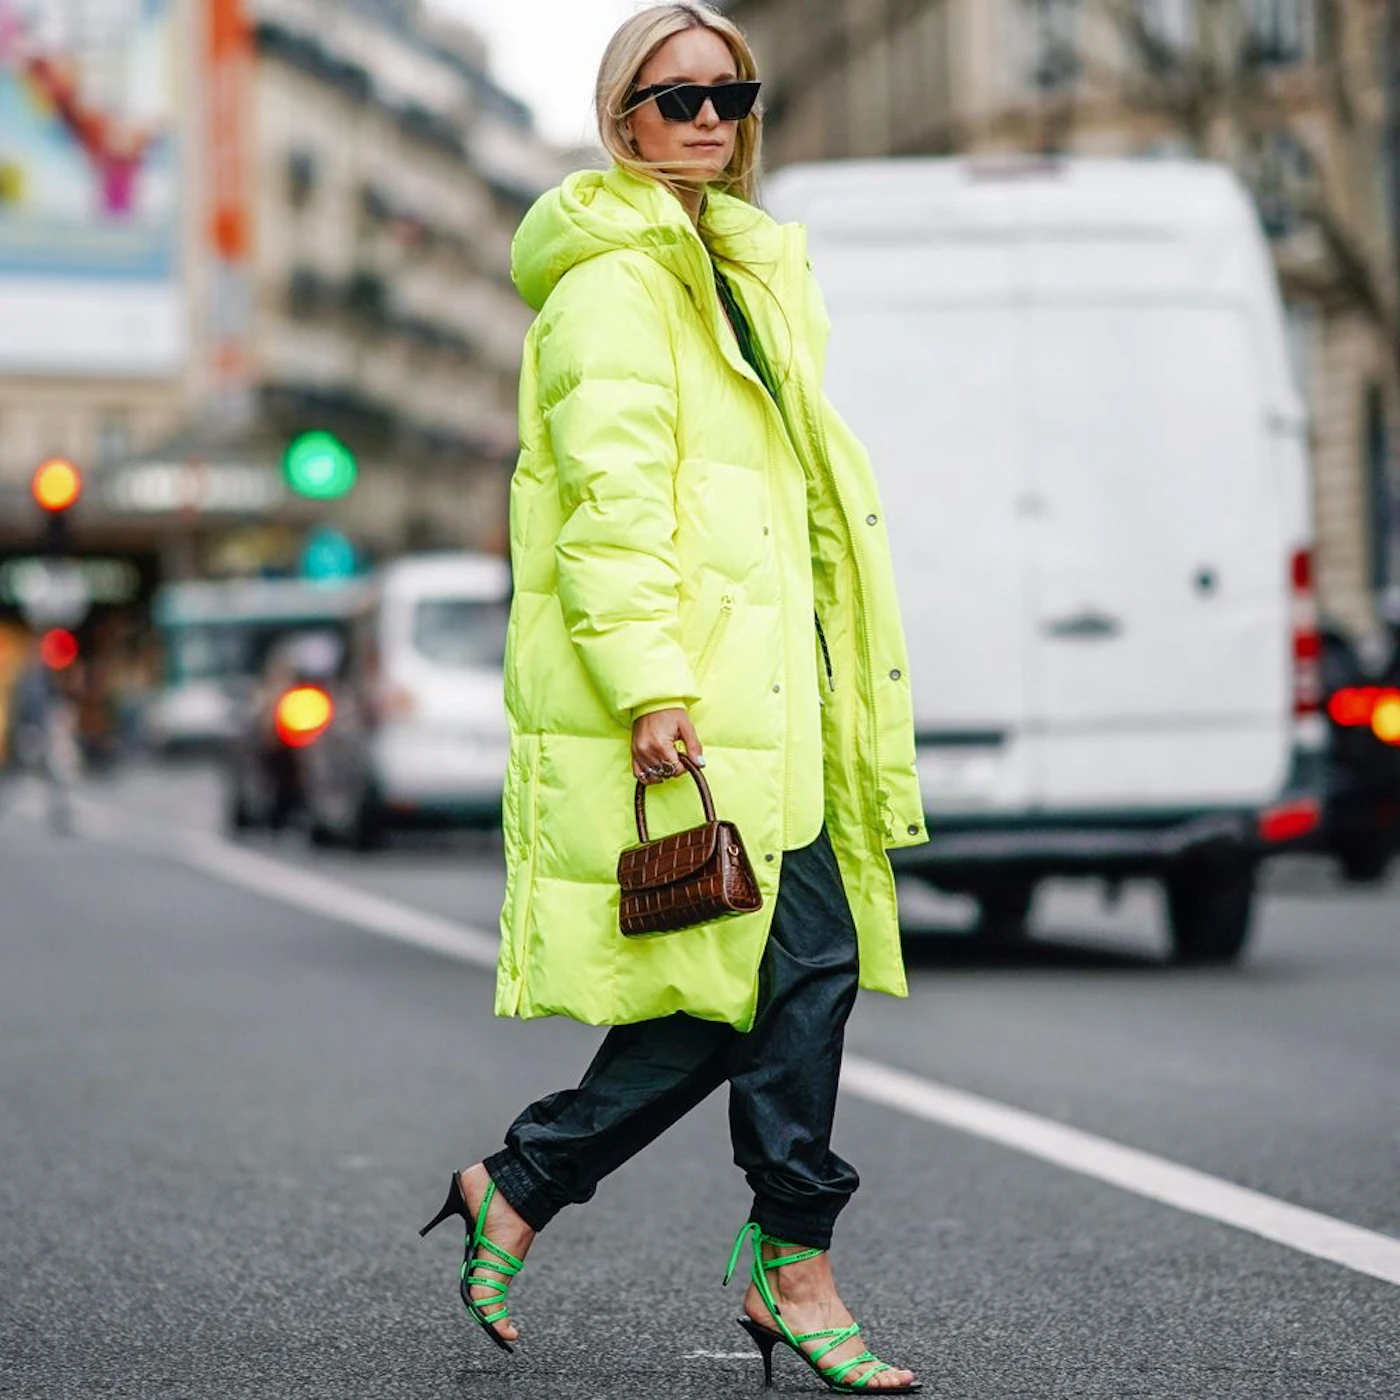 Neon fashion trend: How to wear neon for spring summer